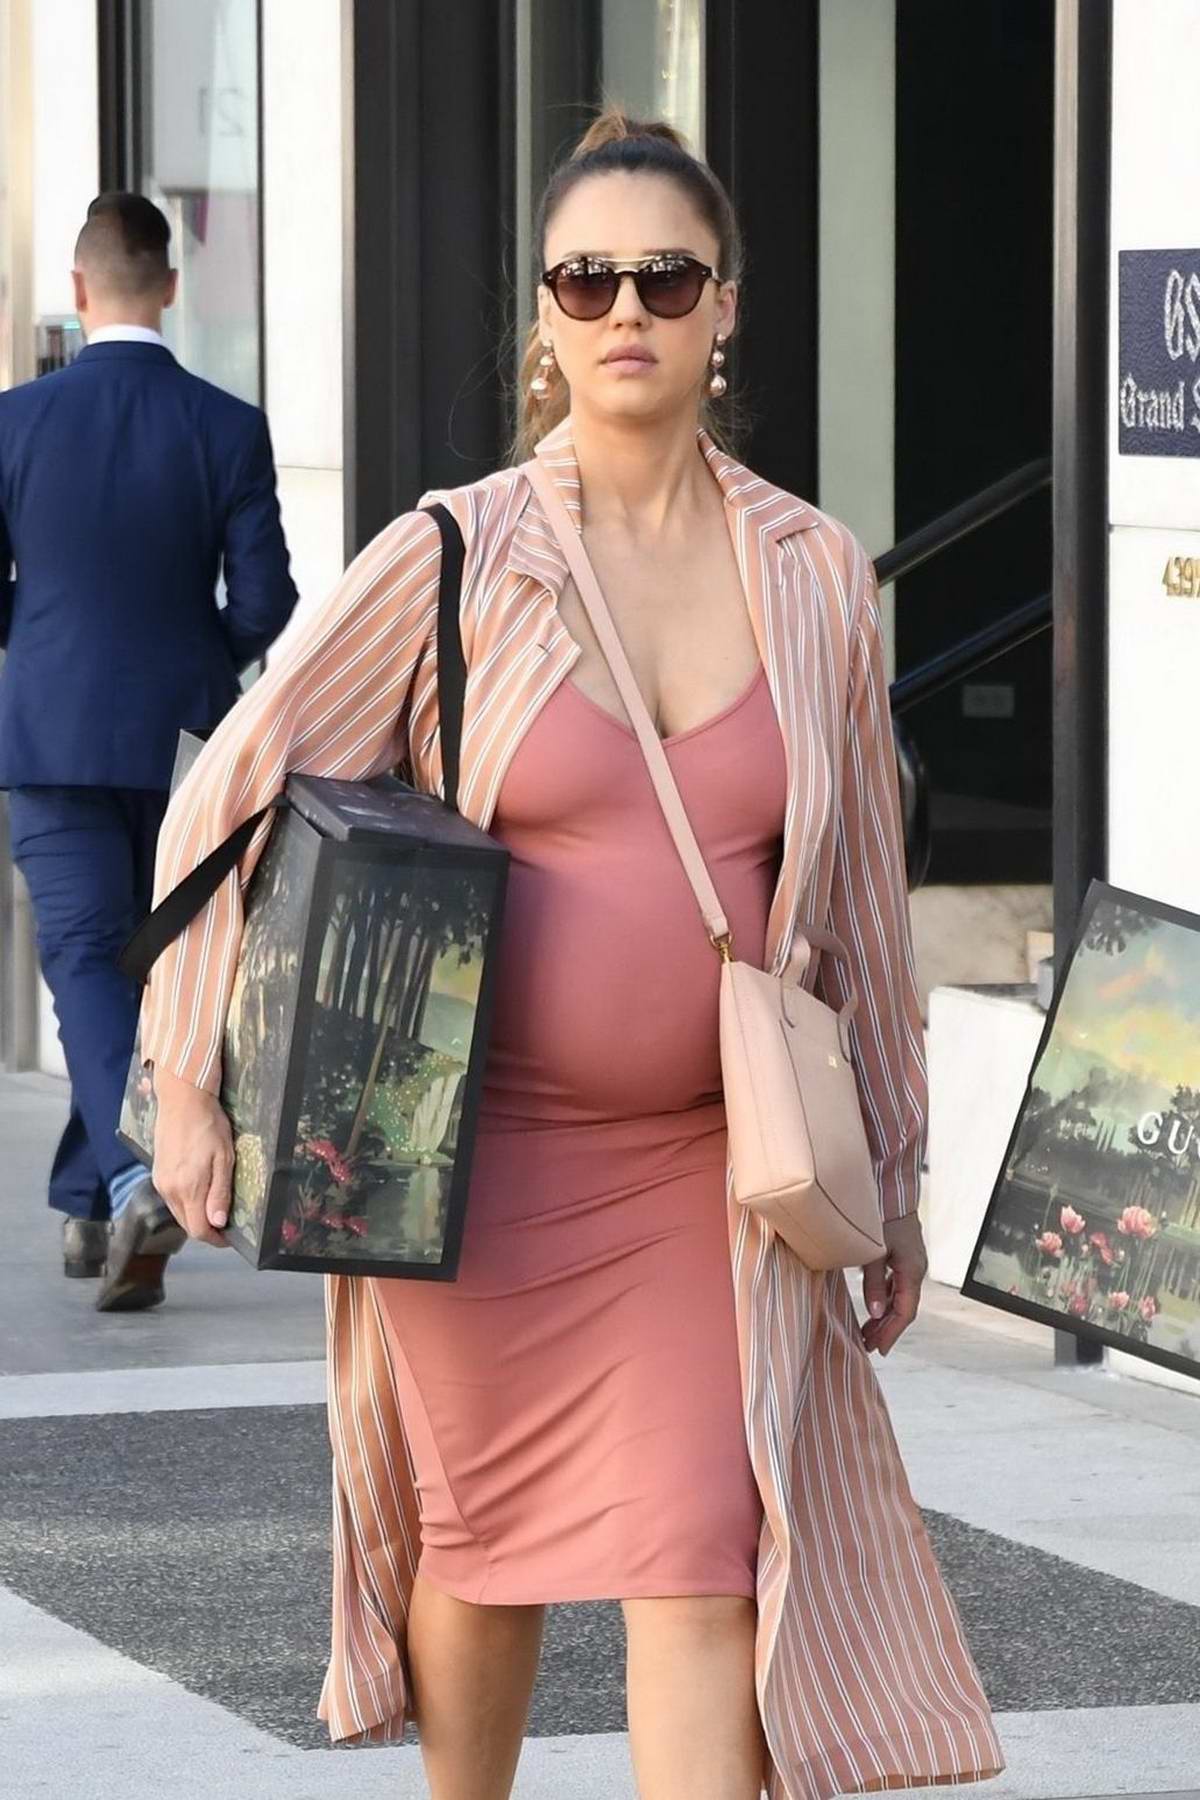 Jessica Alba in a peach dress grabs a few items at Gucci on Rodeo Drive in